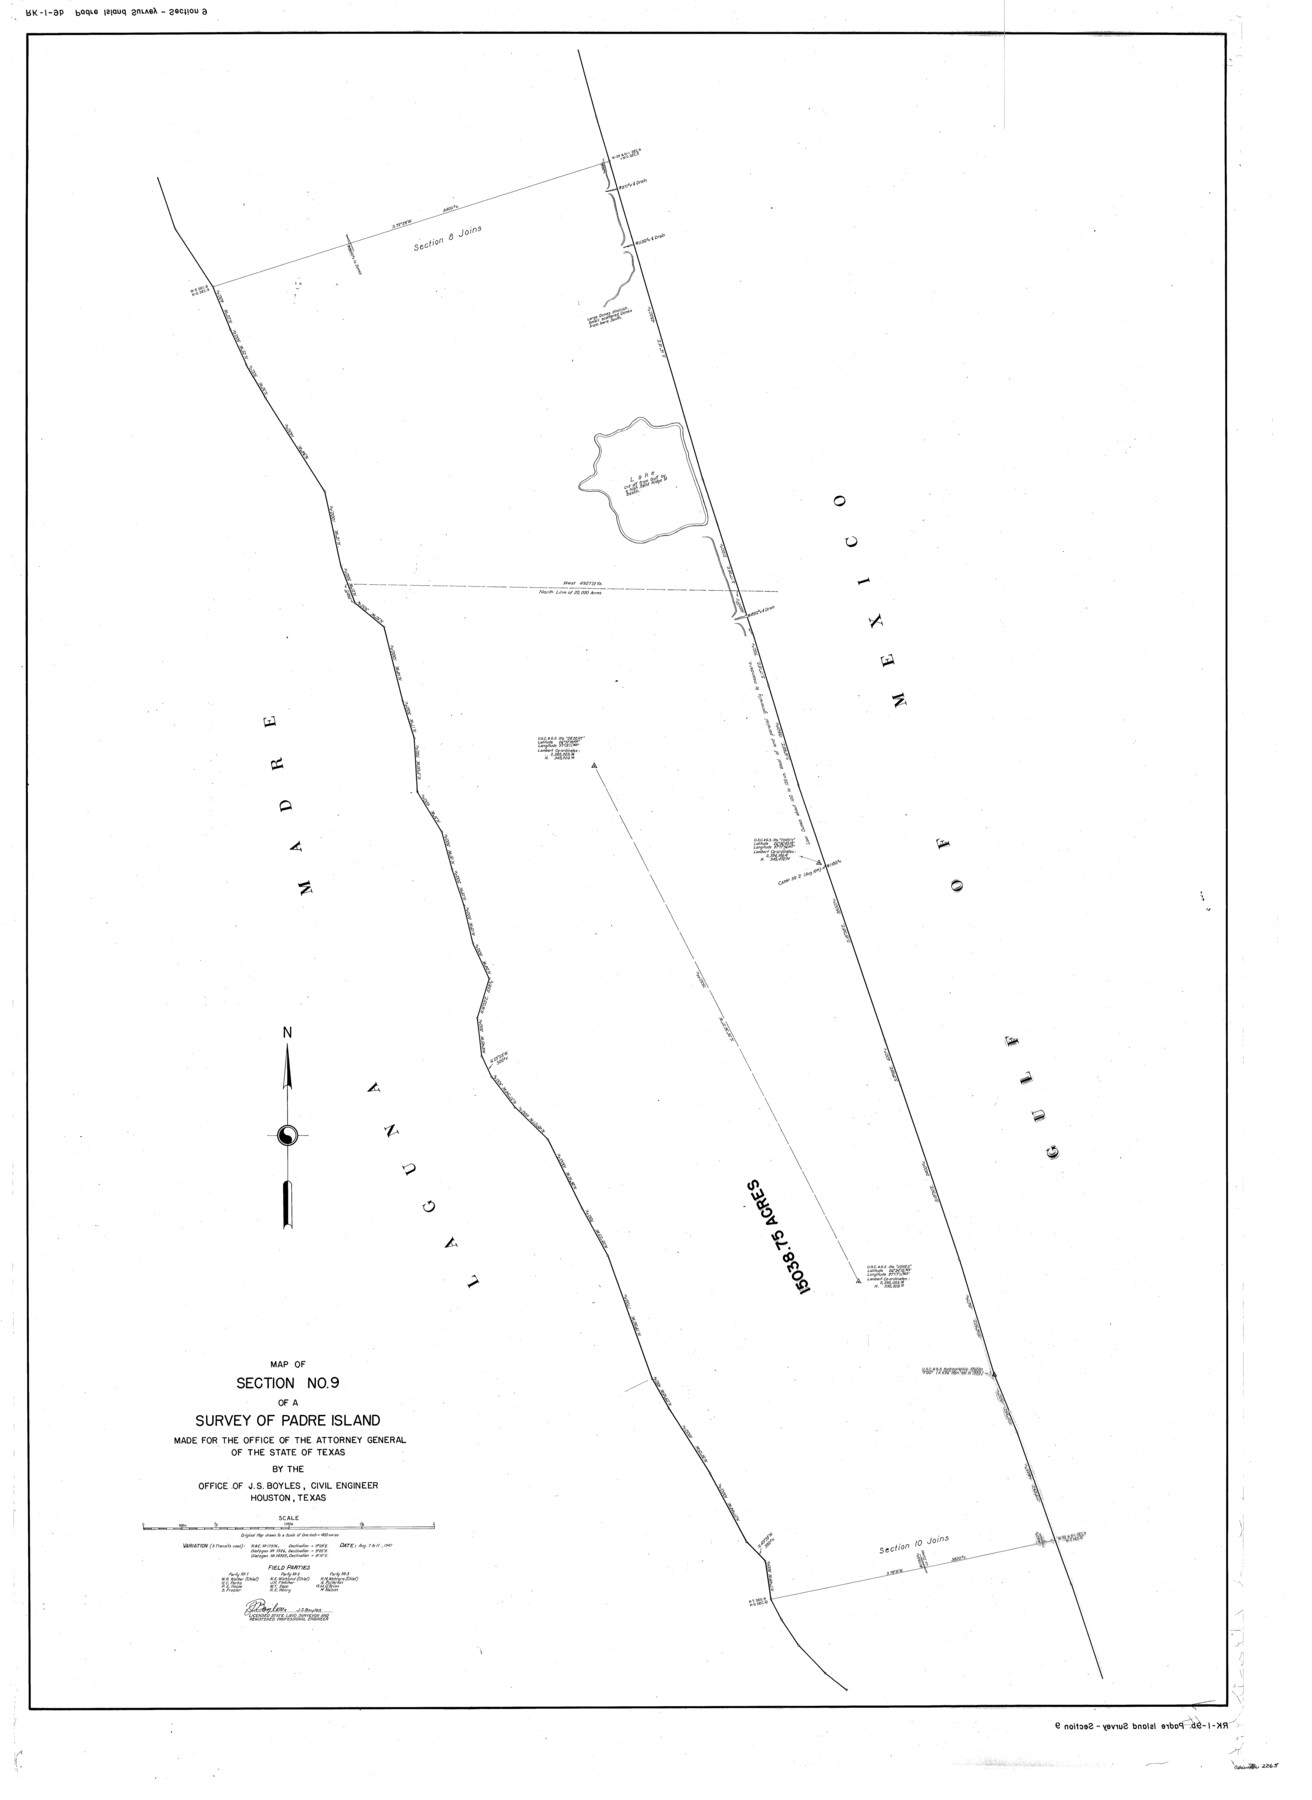 2265, Map of section no. 9 of a survey of Padre Island made for the Office of the Attorney General of the State of Texas, General Map Collection